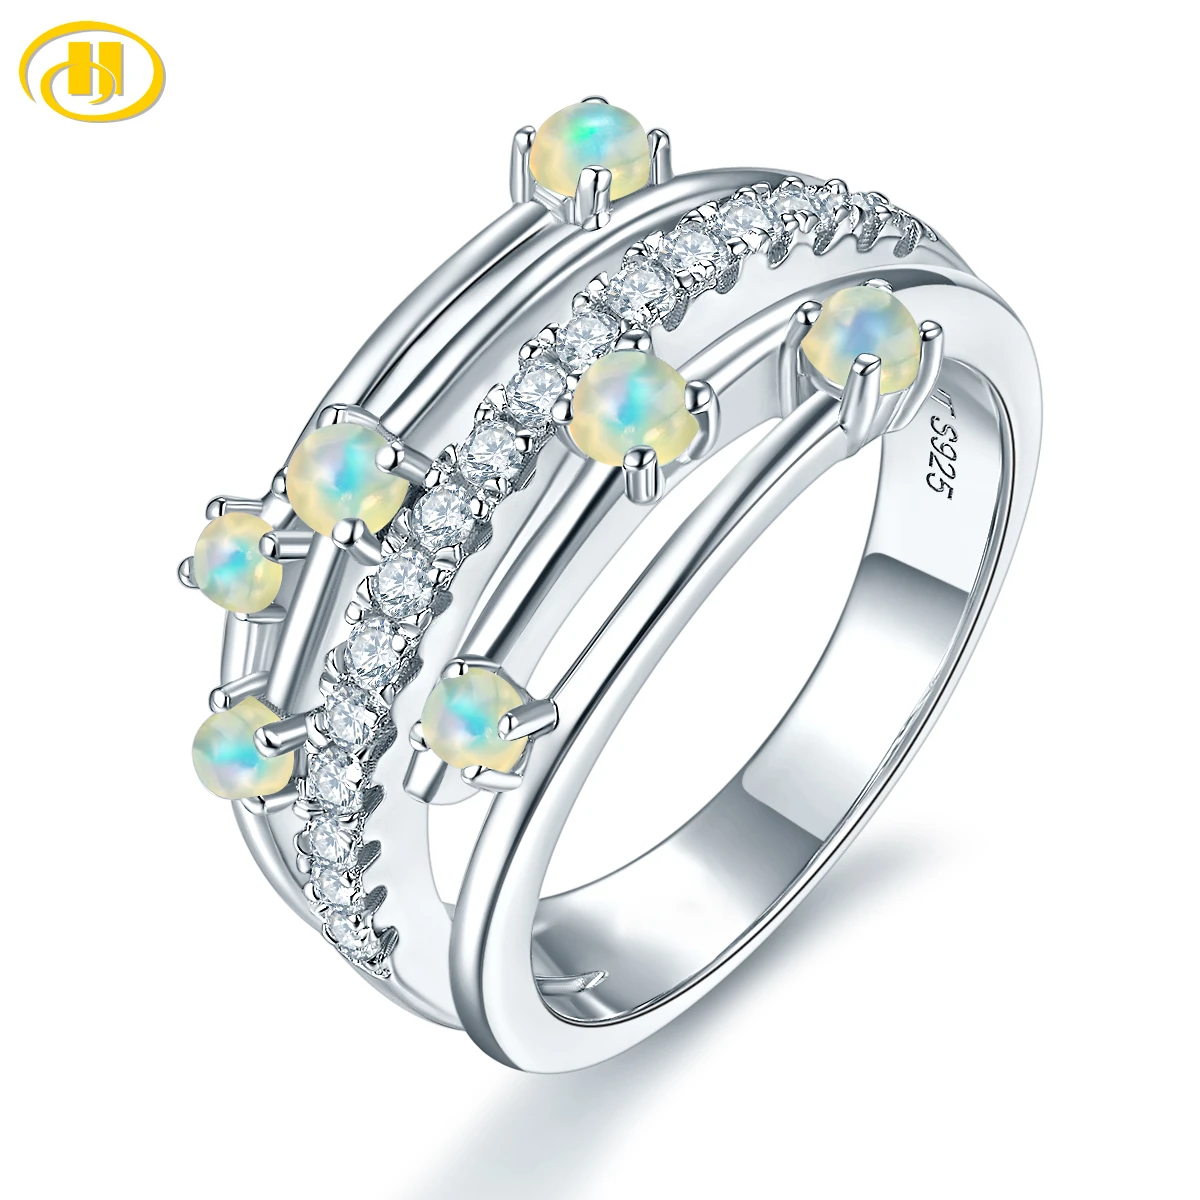 Natural Opal 925 Silver Ring for Women 0.87 Carat Opal S925 Silver Women's Ring Classic Design Exquisite Style Anniversary